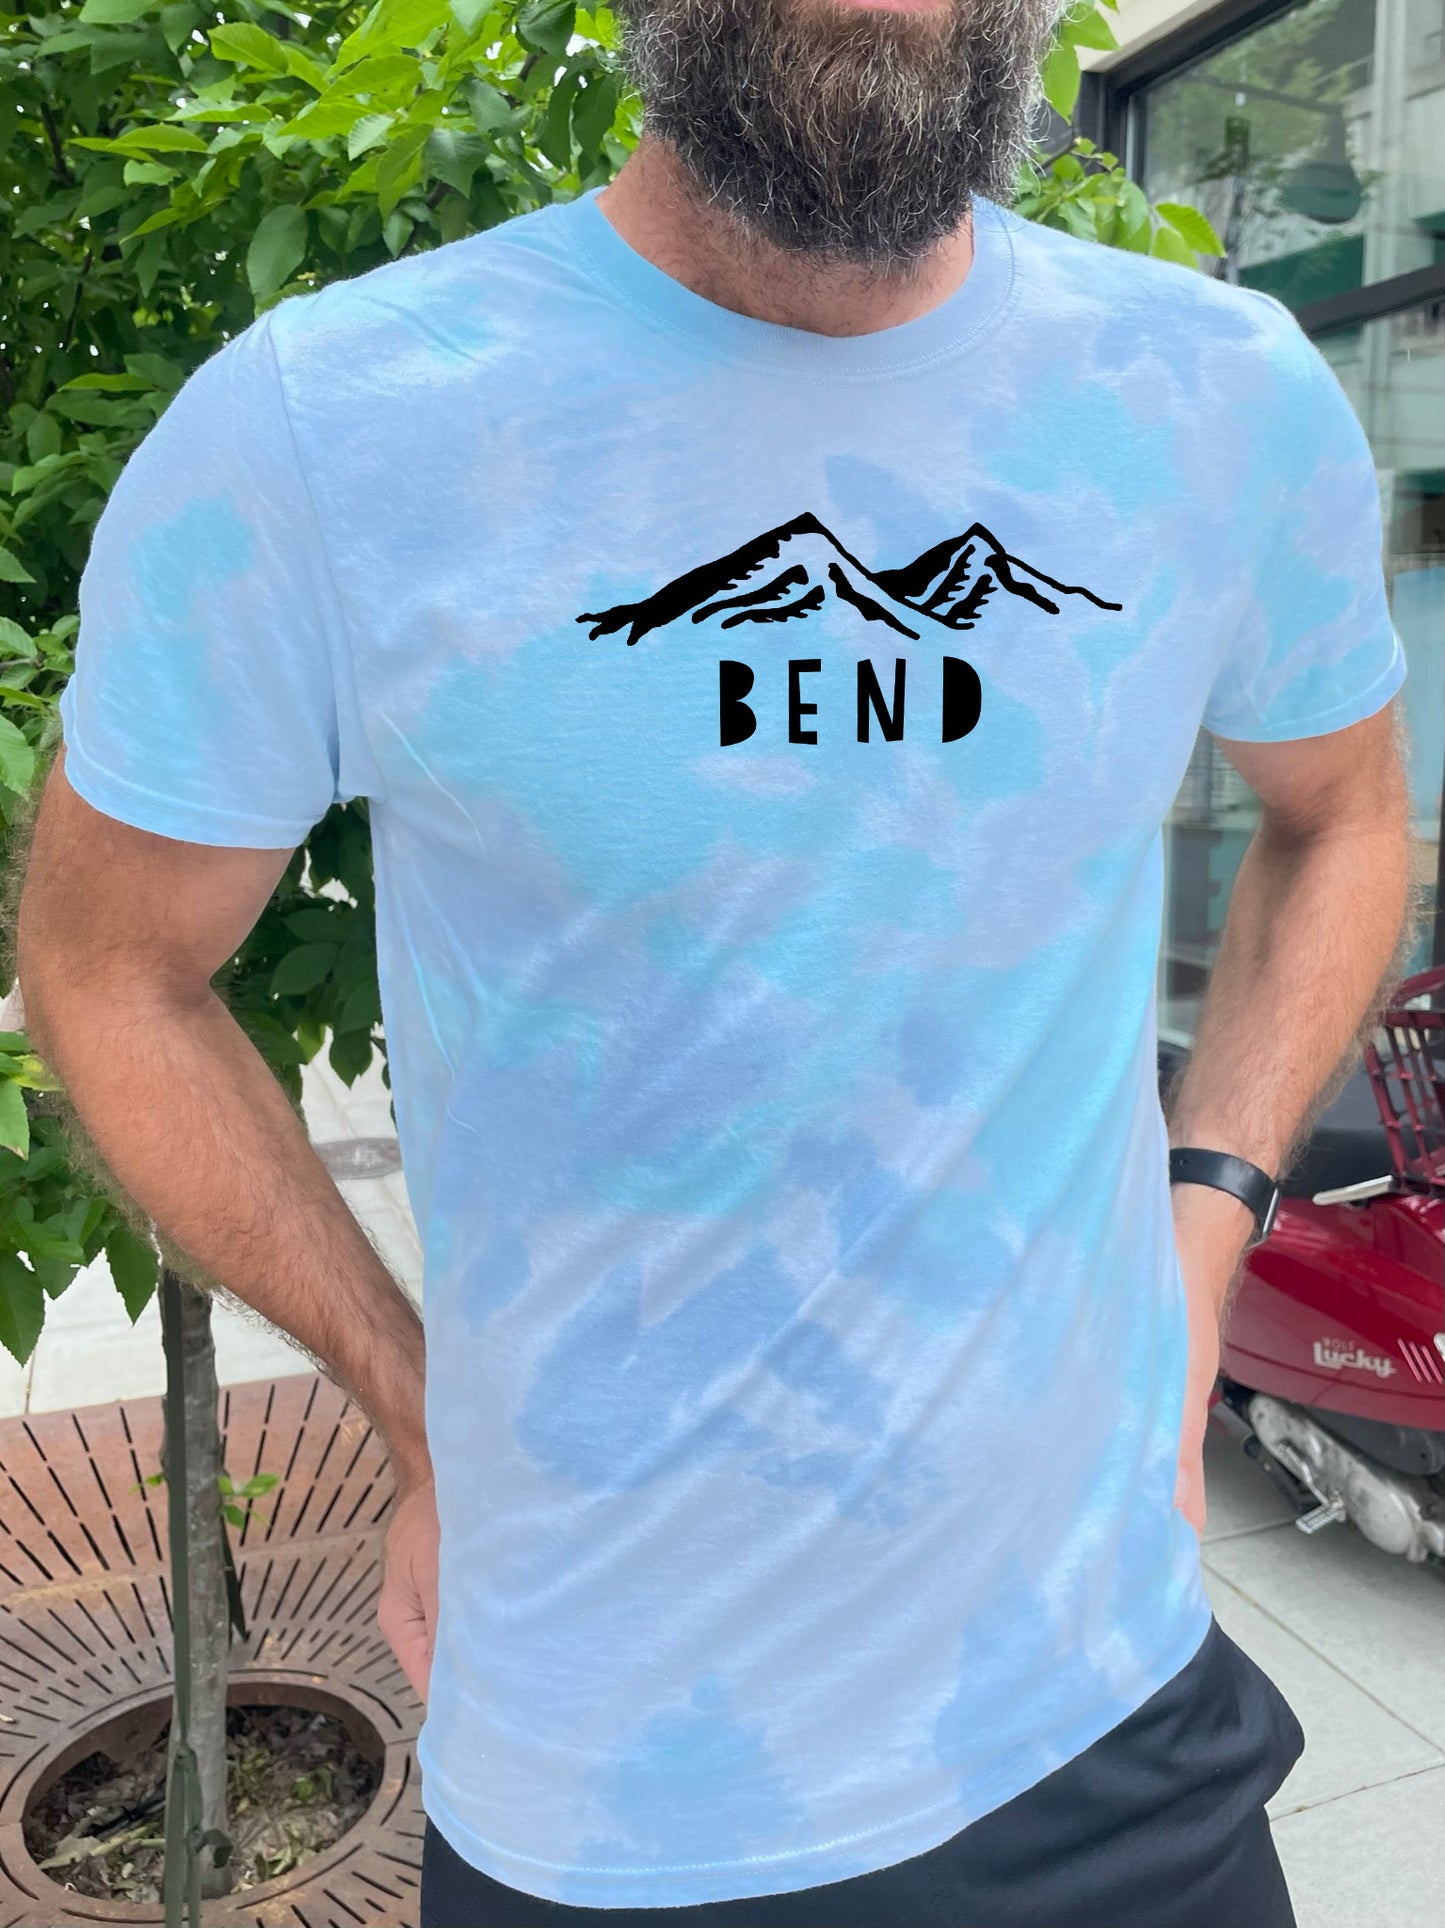 a man with a beard wearing a t - shirt that says bend